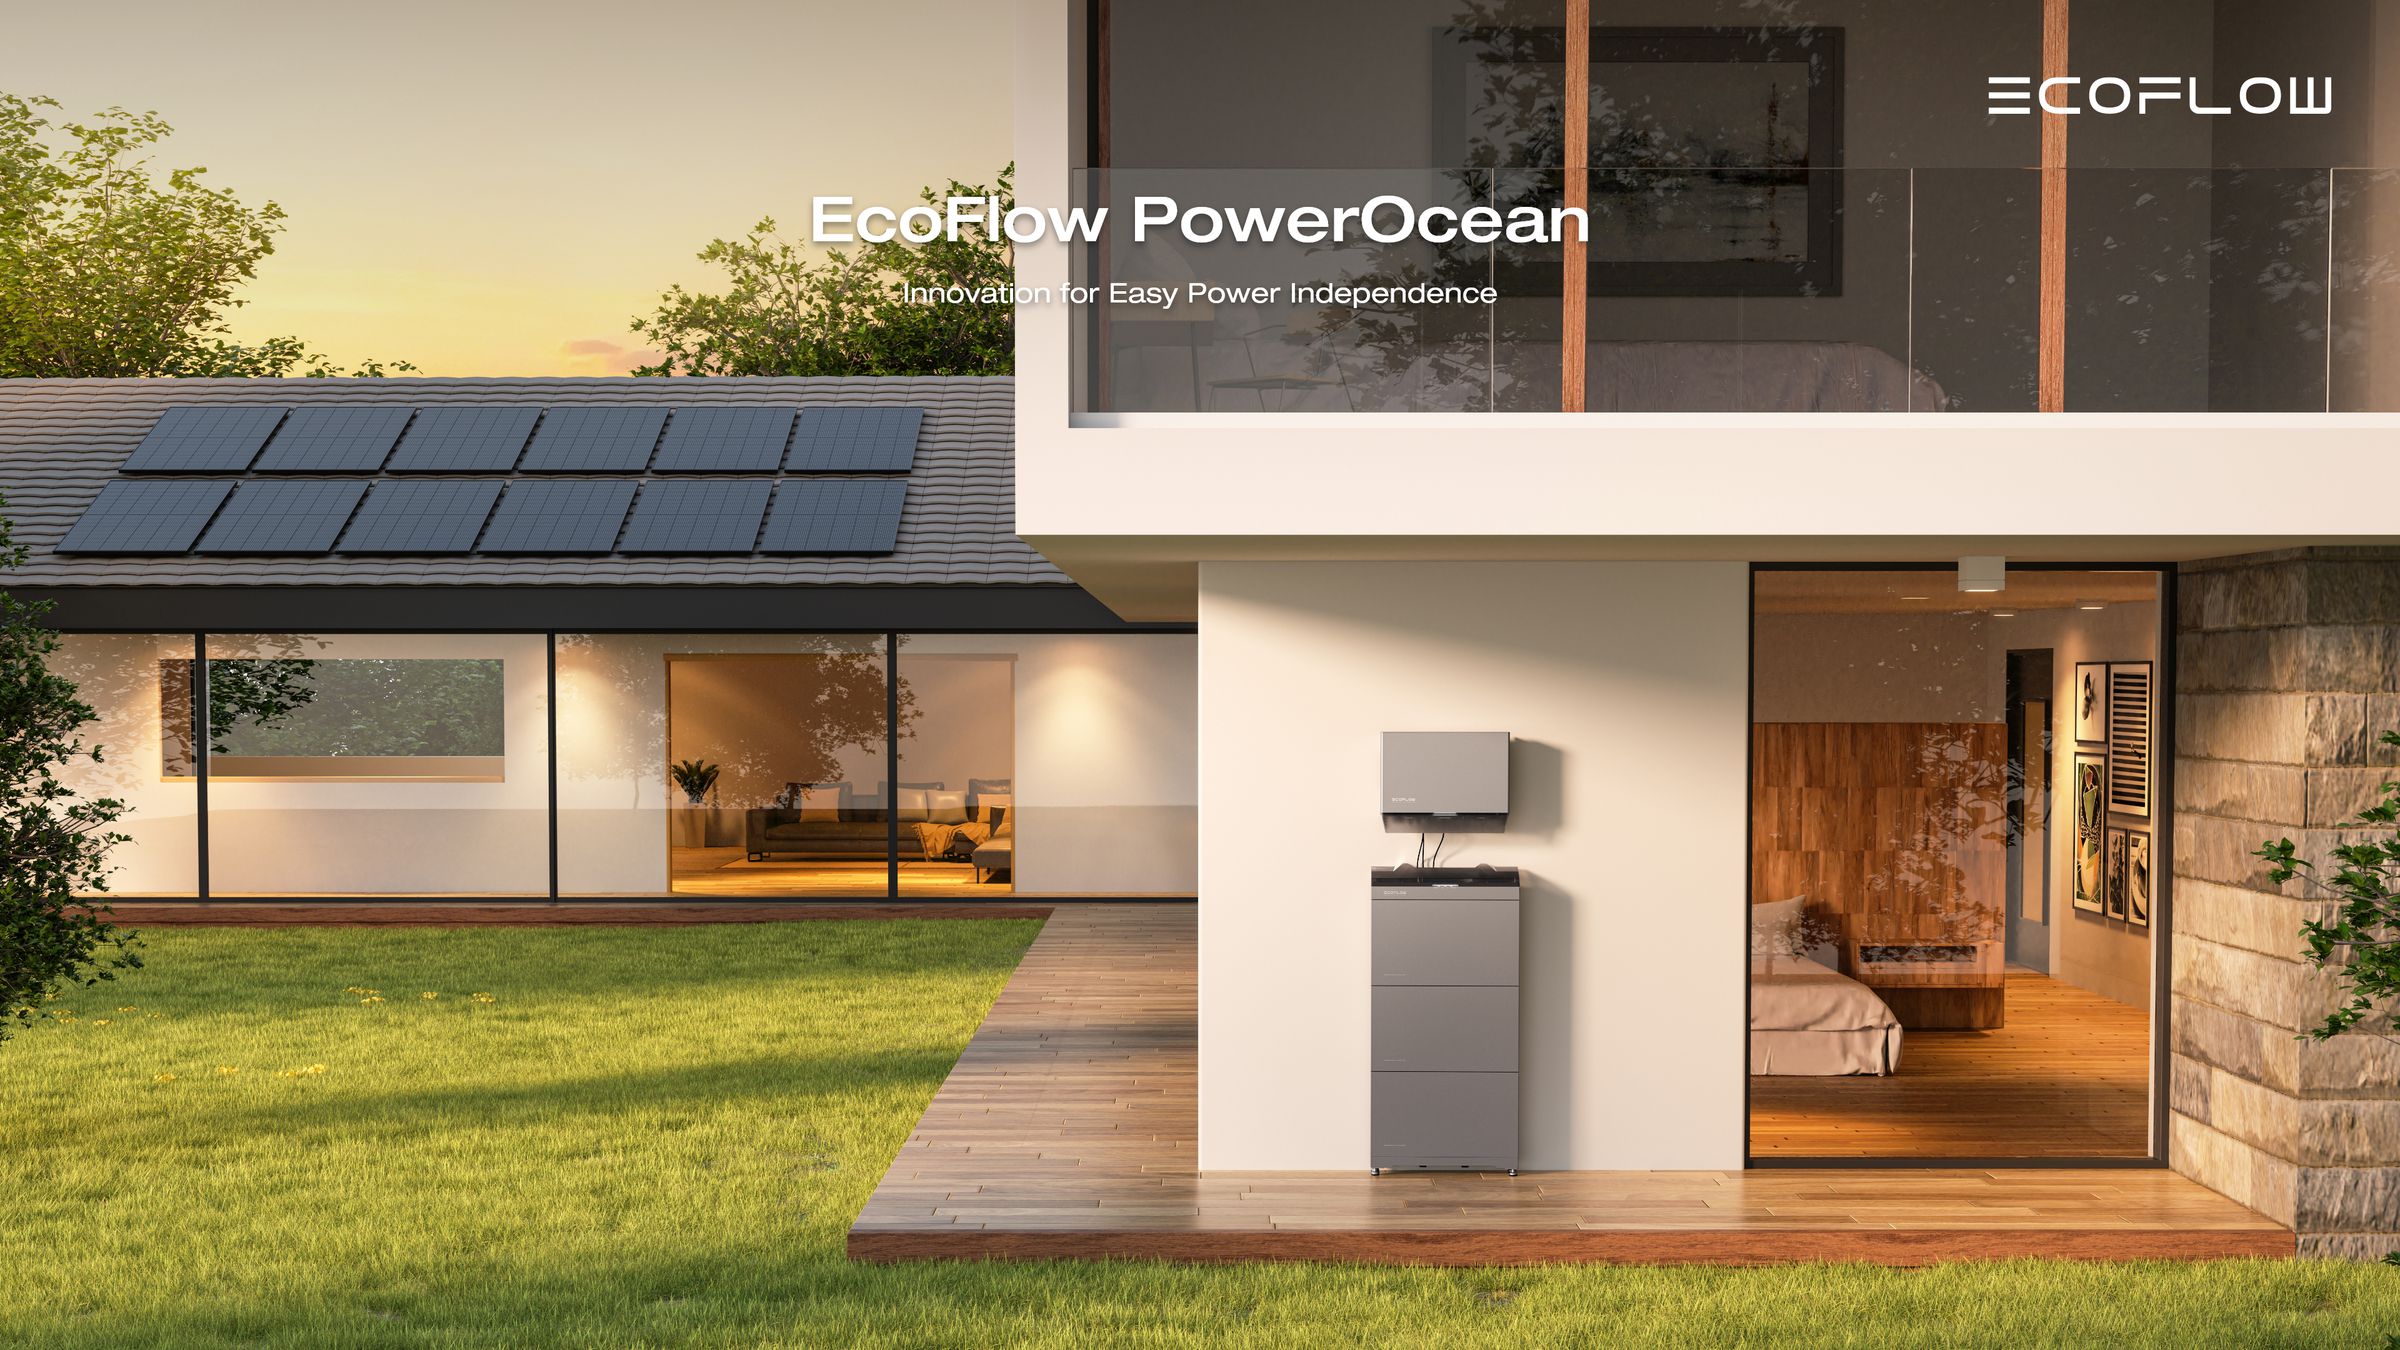 PowerOcean is made to be weather resistant and must be professionally installed.